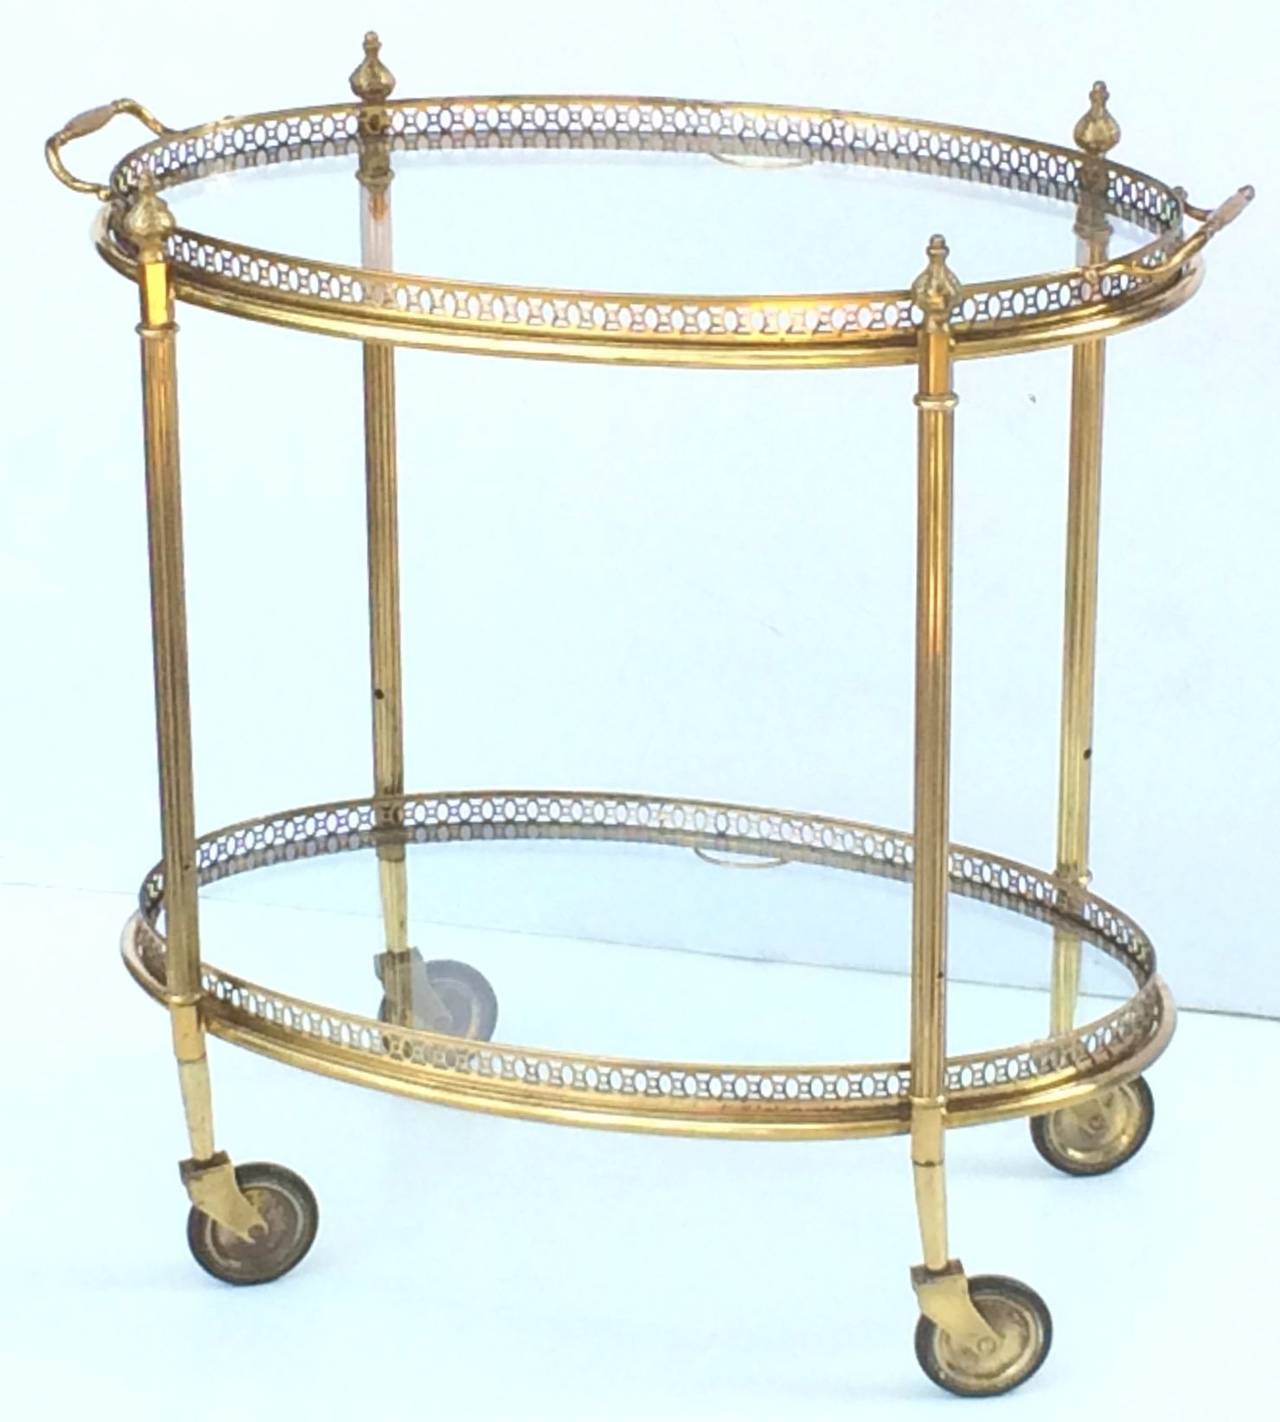 A vintage French oval bar cart or cocktail trolley of brass and glass with pierced galleries, removable top and bottom trays, on rolling caster wheels. 

Perfect for use as a side or end table or for serving.